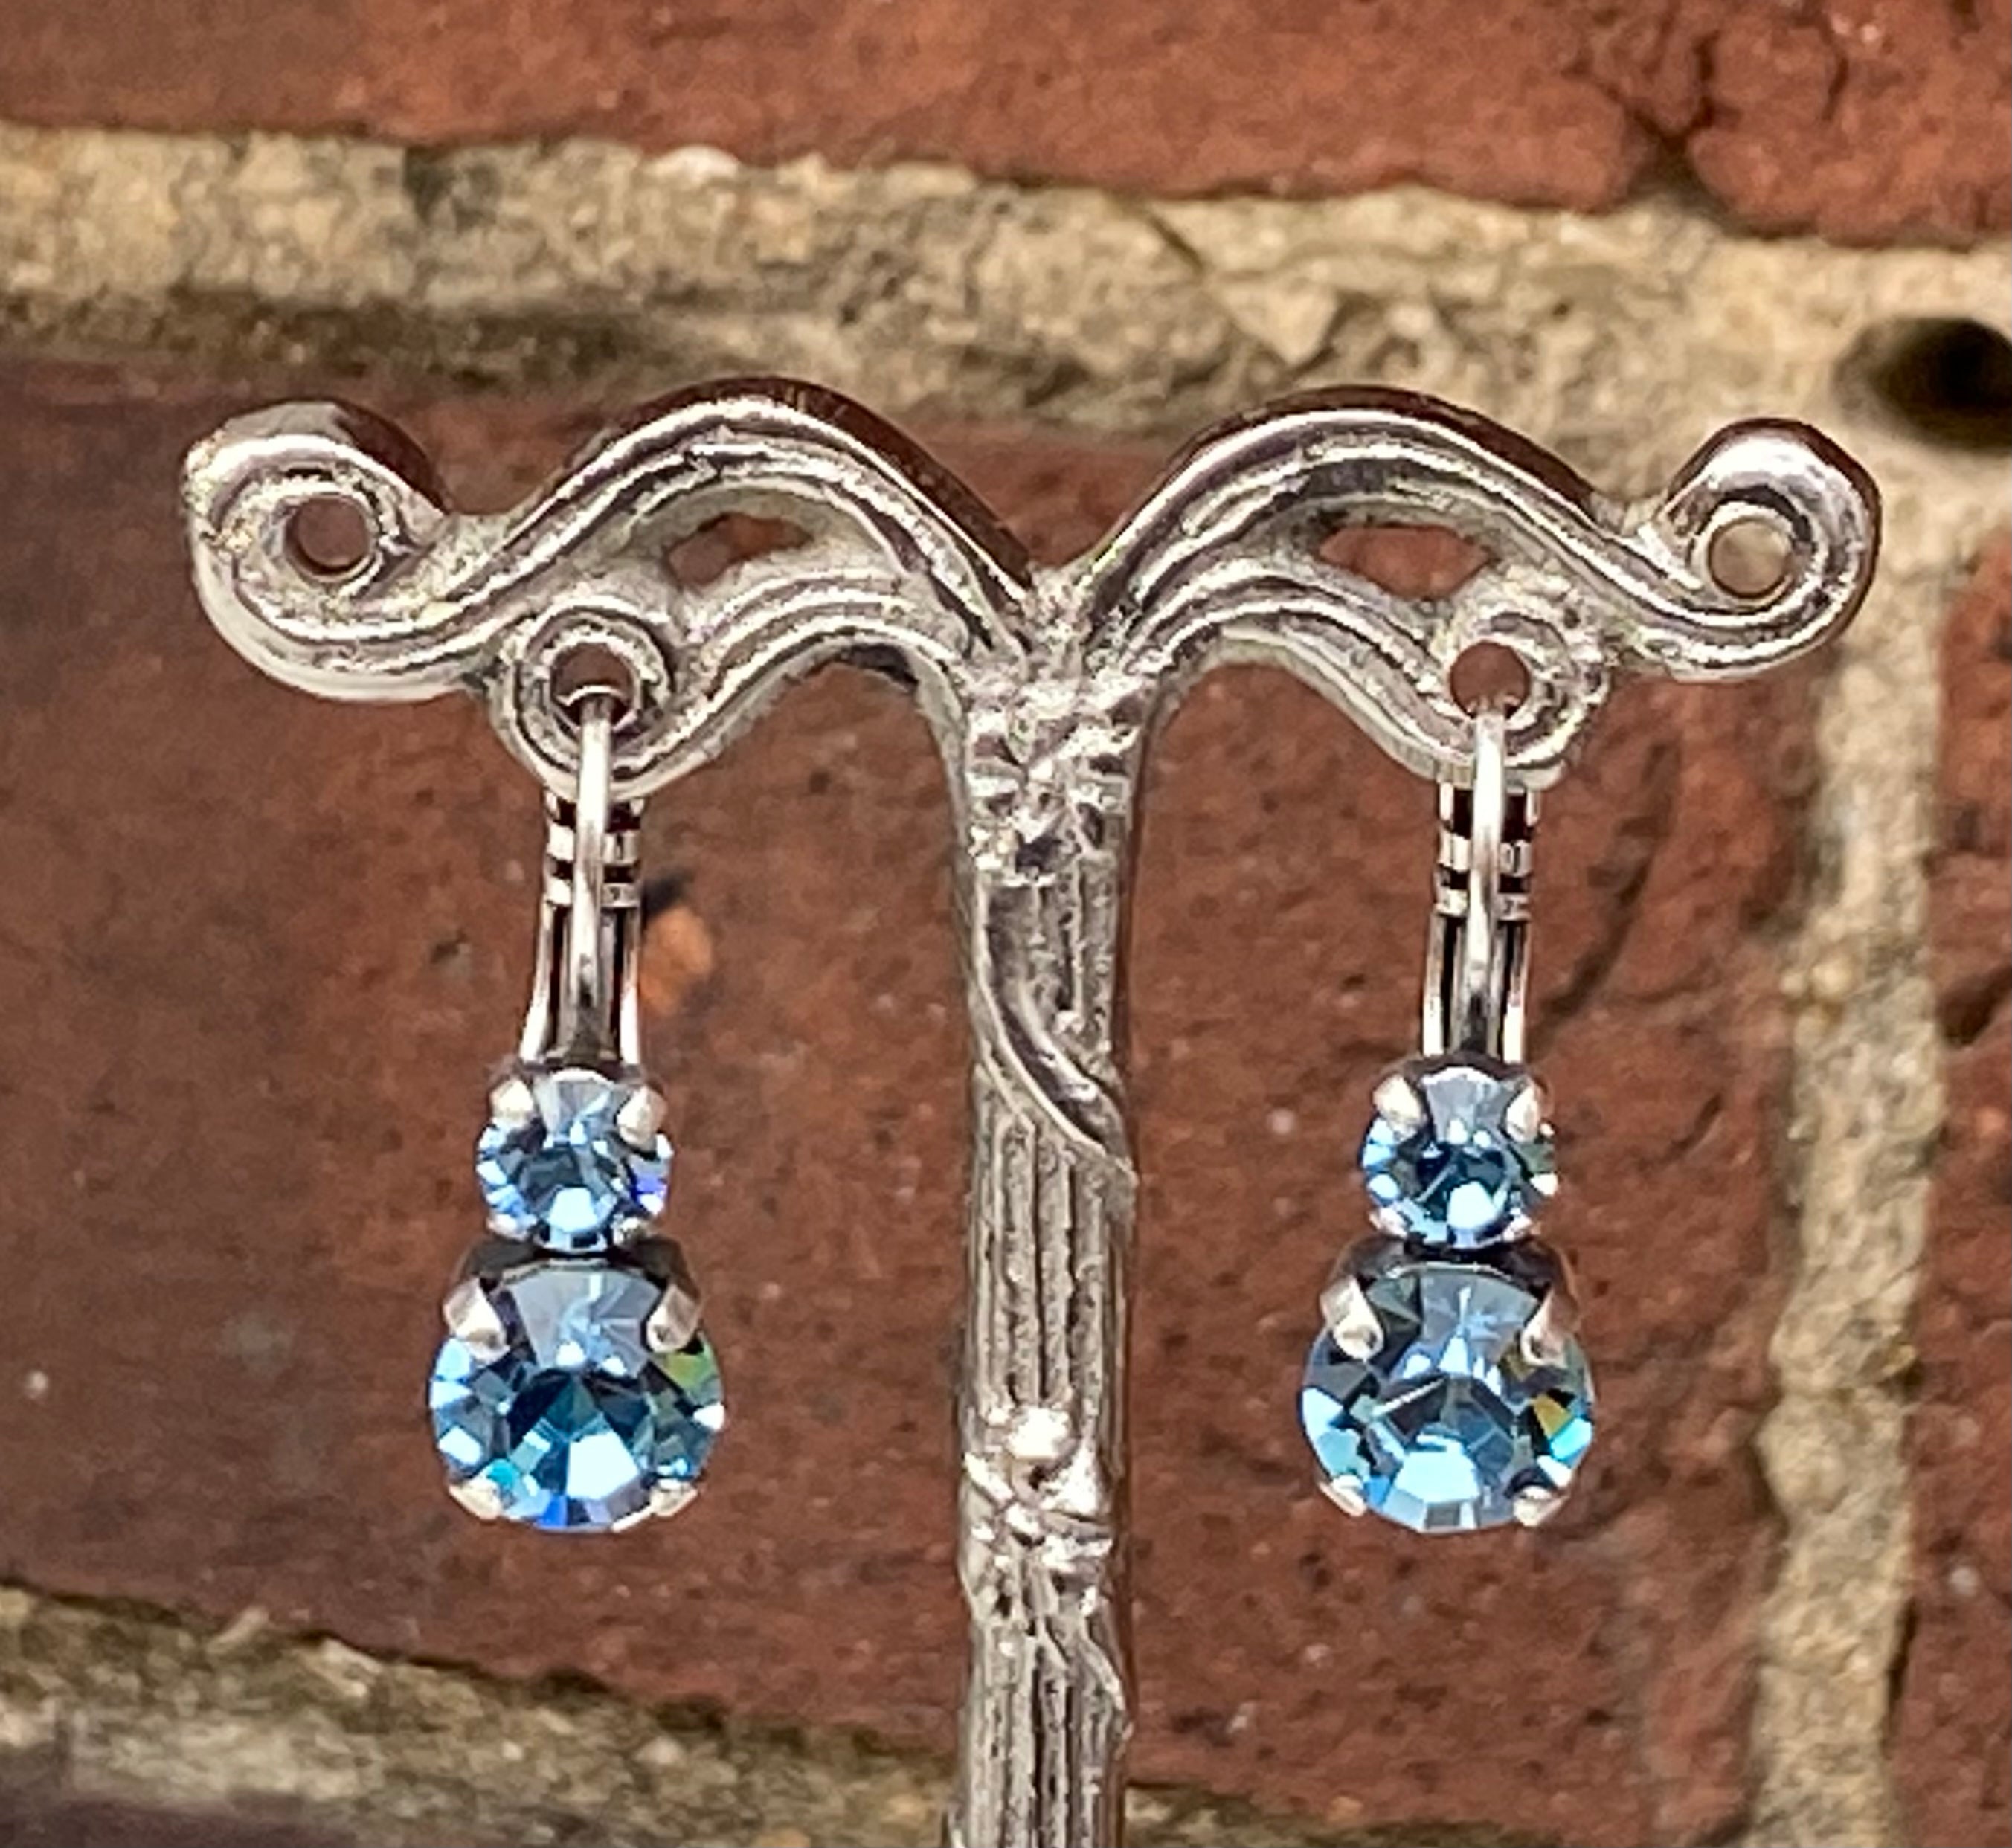 Mariana Antique Silver Must-Have Double Stone Crystal Leverback Earrings in “Light Blue”